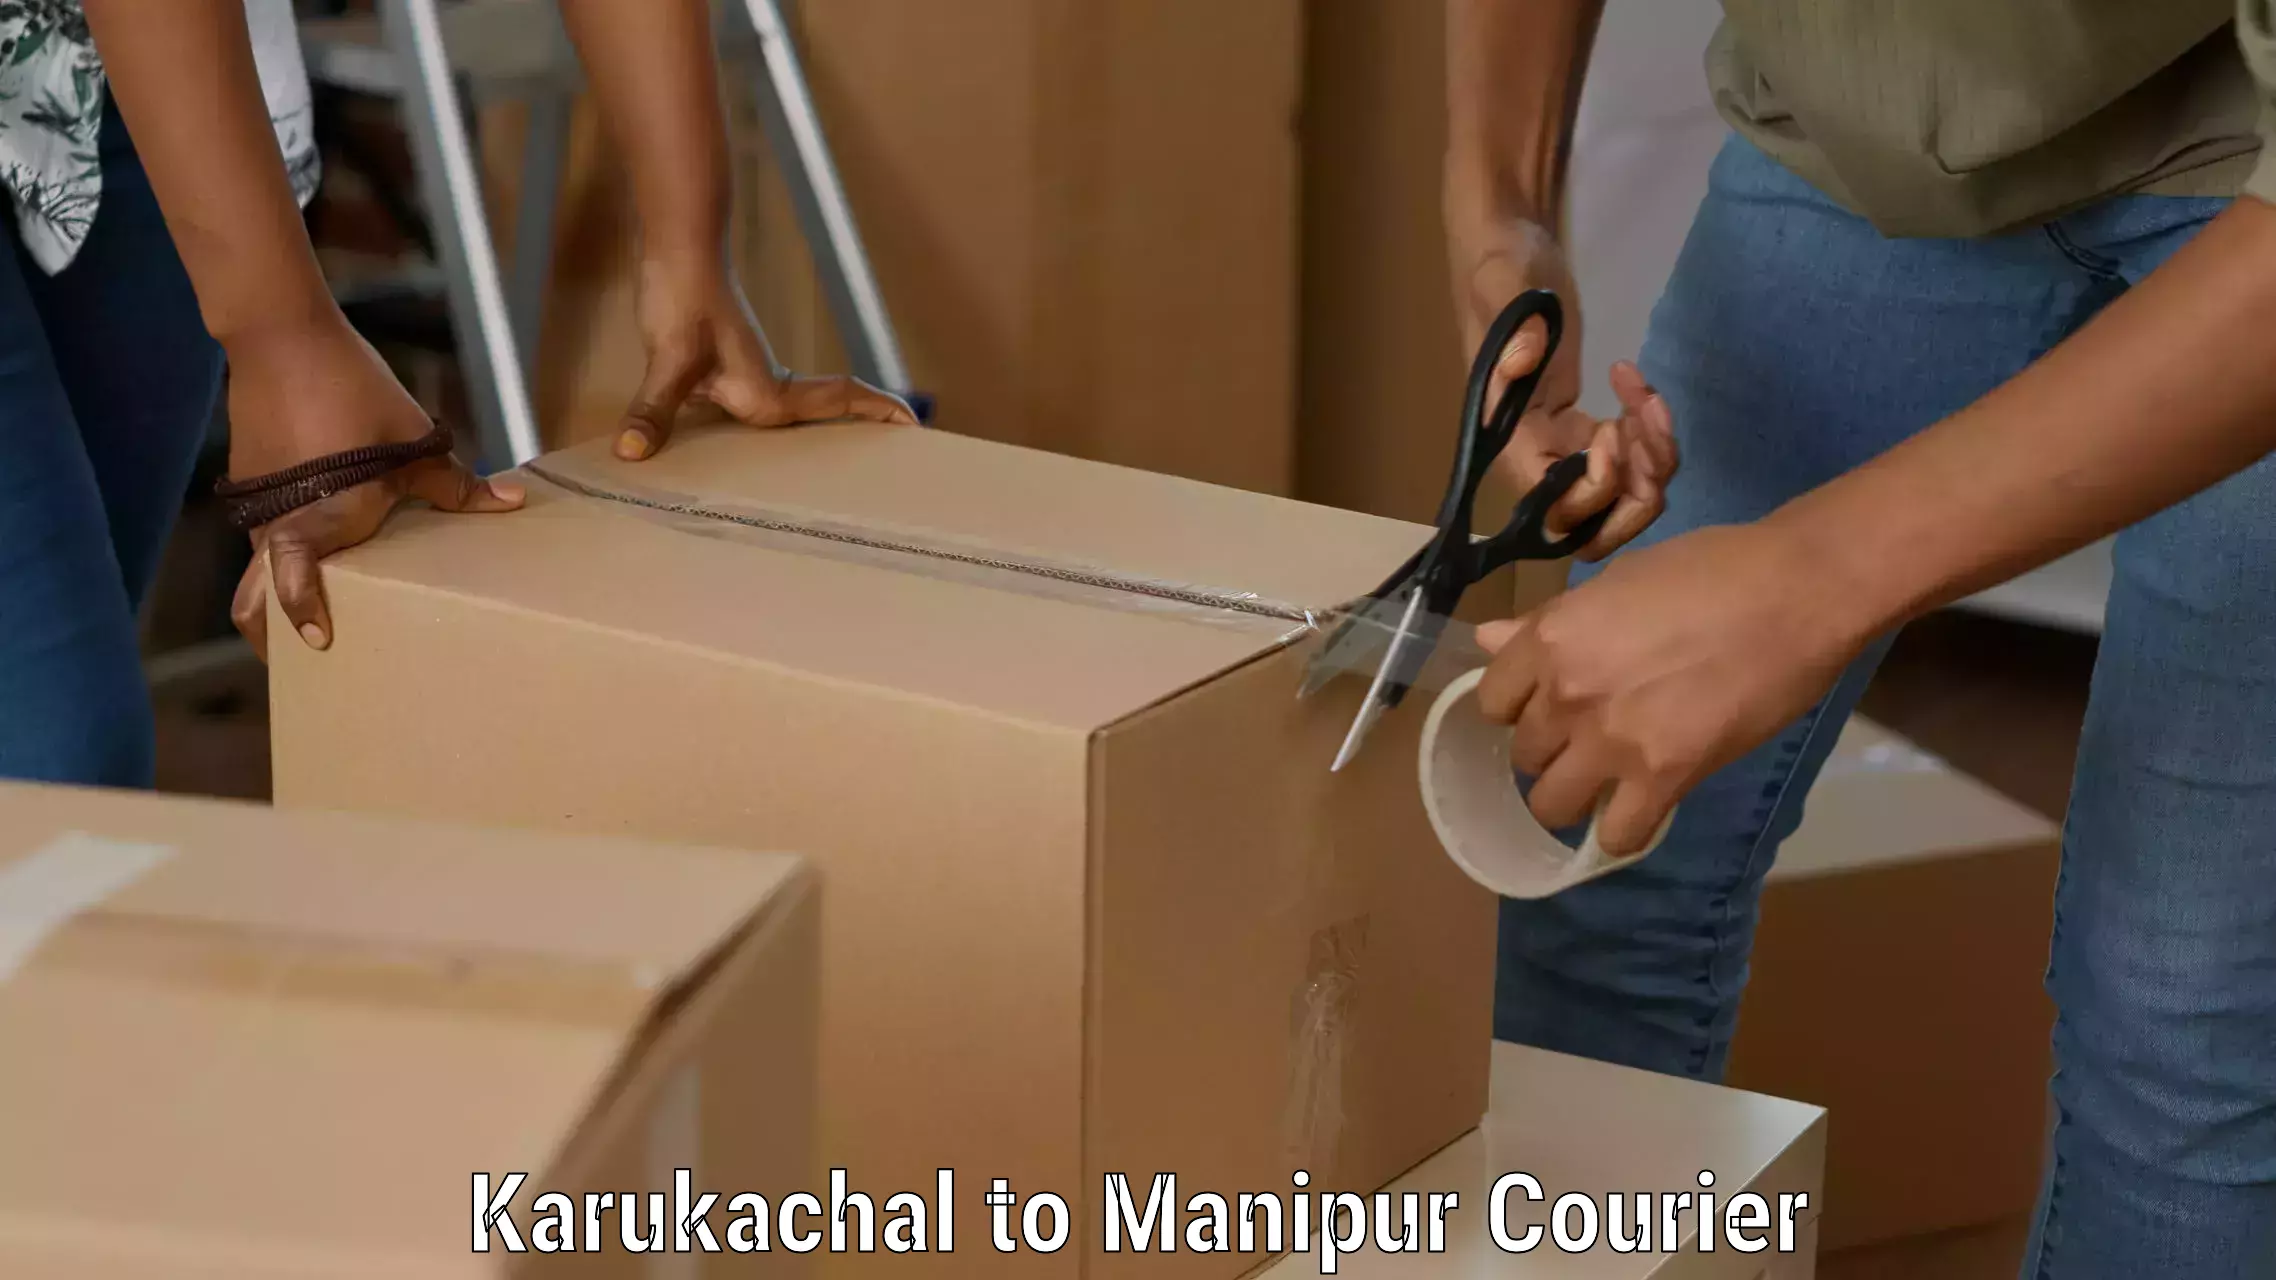 State-of-the-art courier technology Karukachal to Kanti